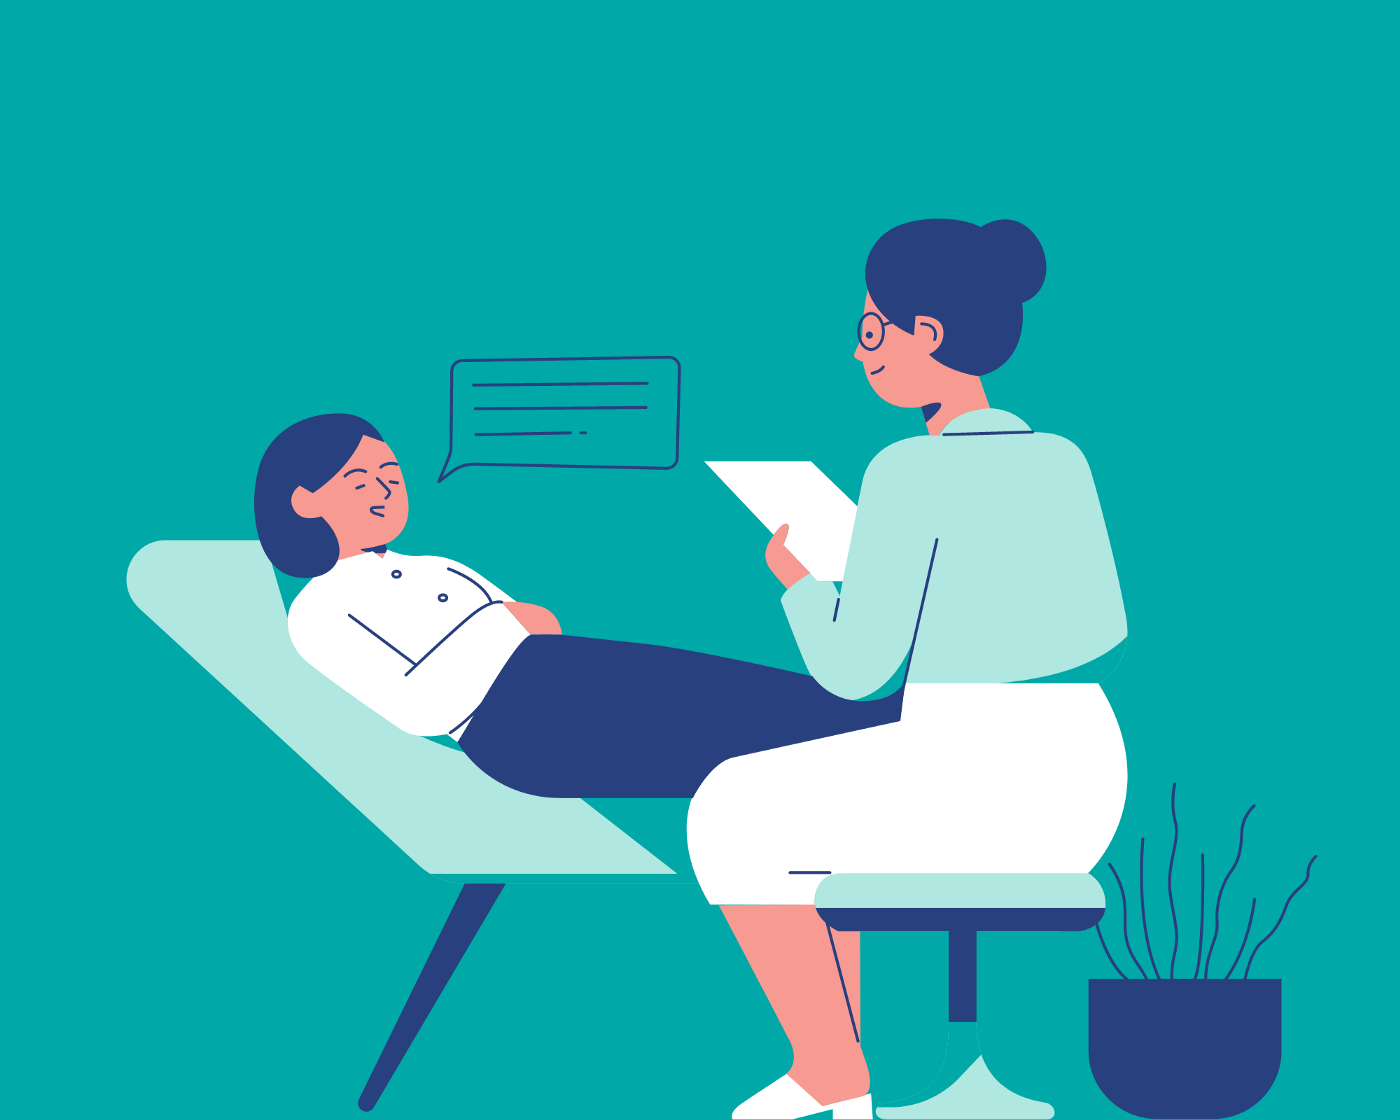 Vector illustration of a person lying in a chair or couch during a therapy session. They seem to be speaking to a therapist sitting in a chair next to them taking notes.